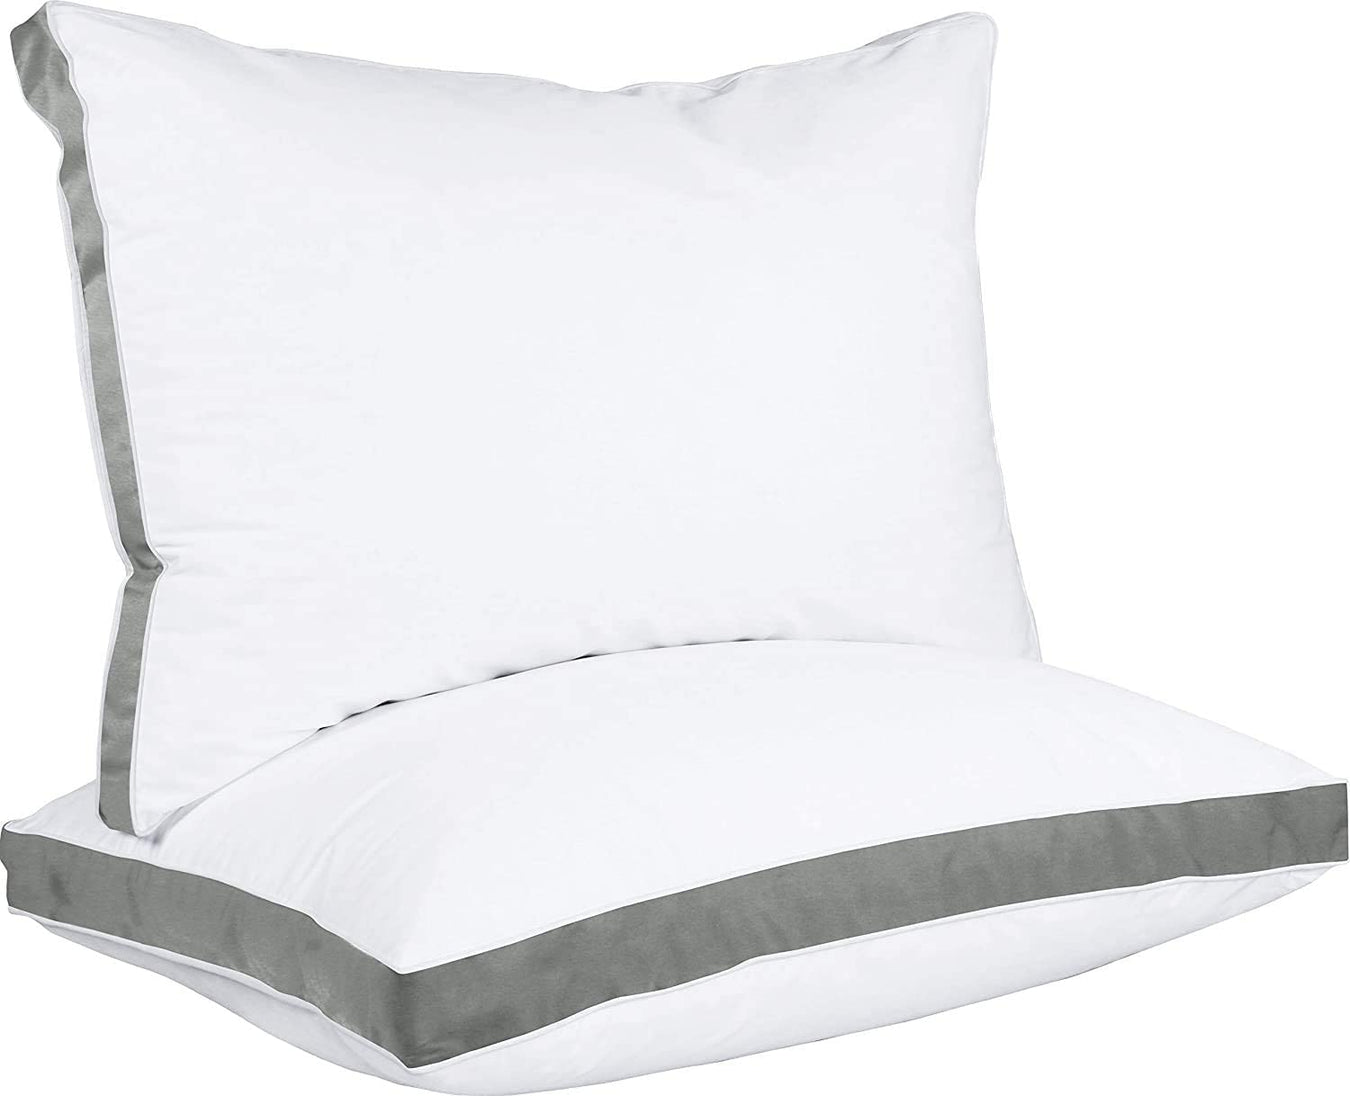 View All Pillows, Toppers & Linens